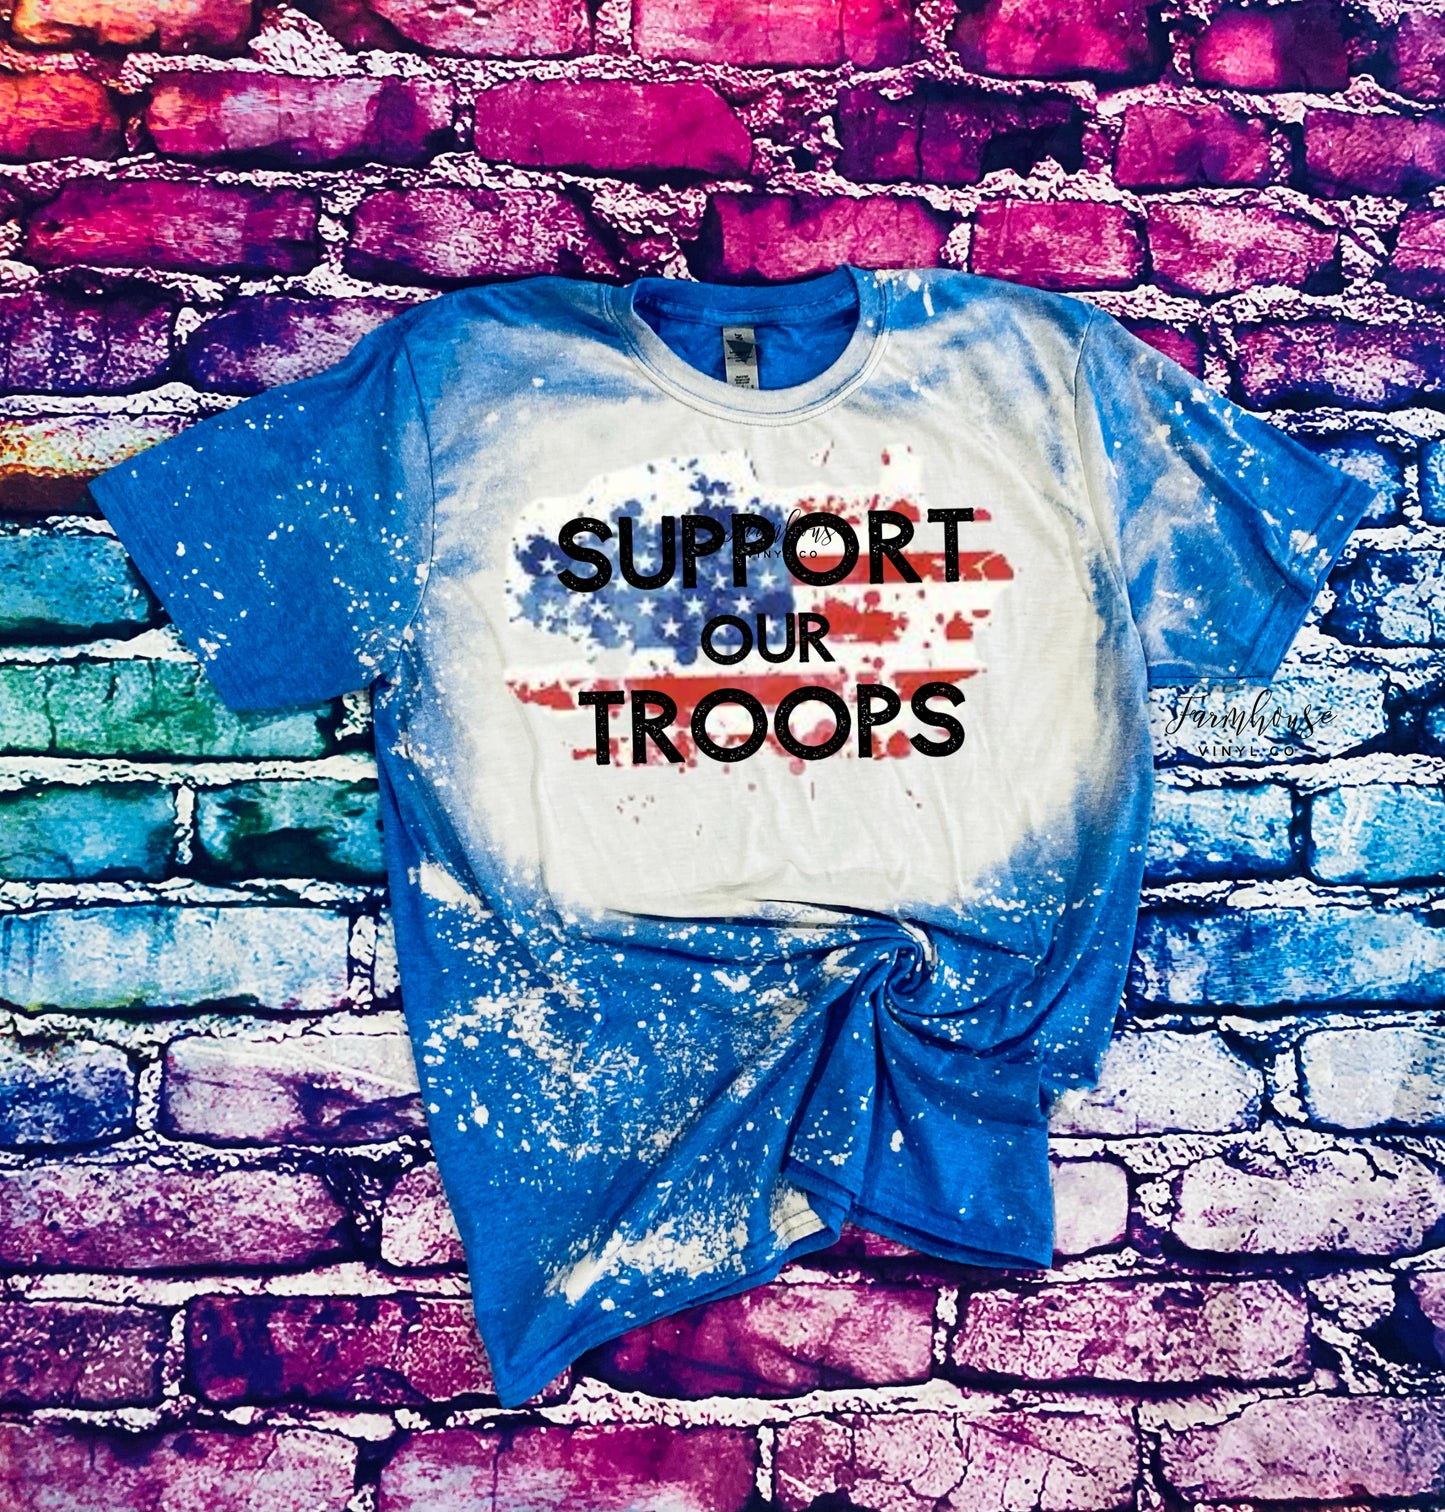 Support Our Troops Shirts - Farmhouse Vinyl Co